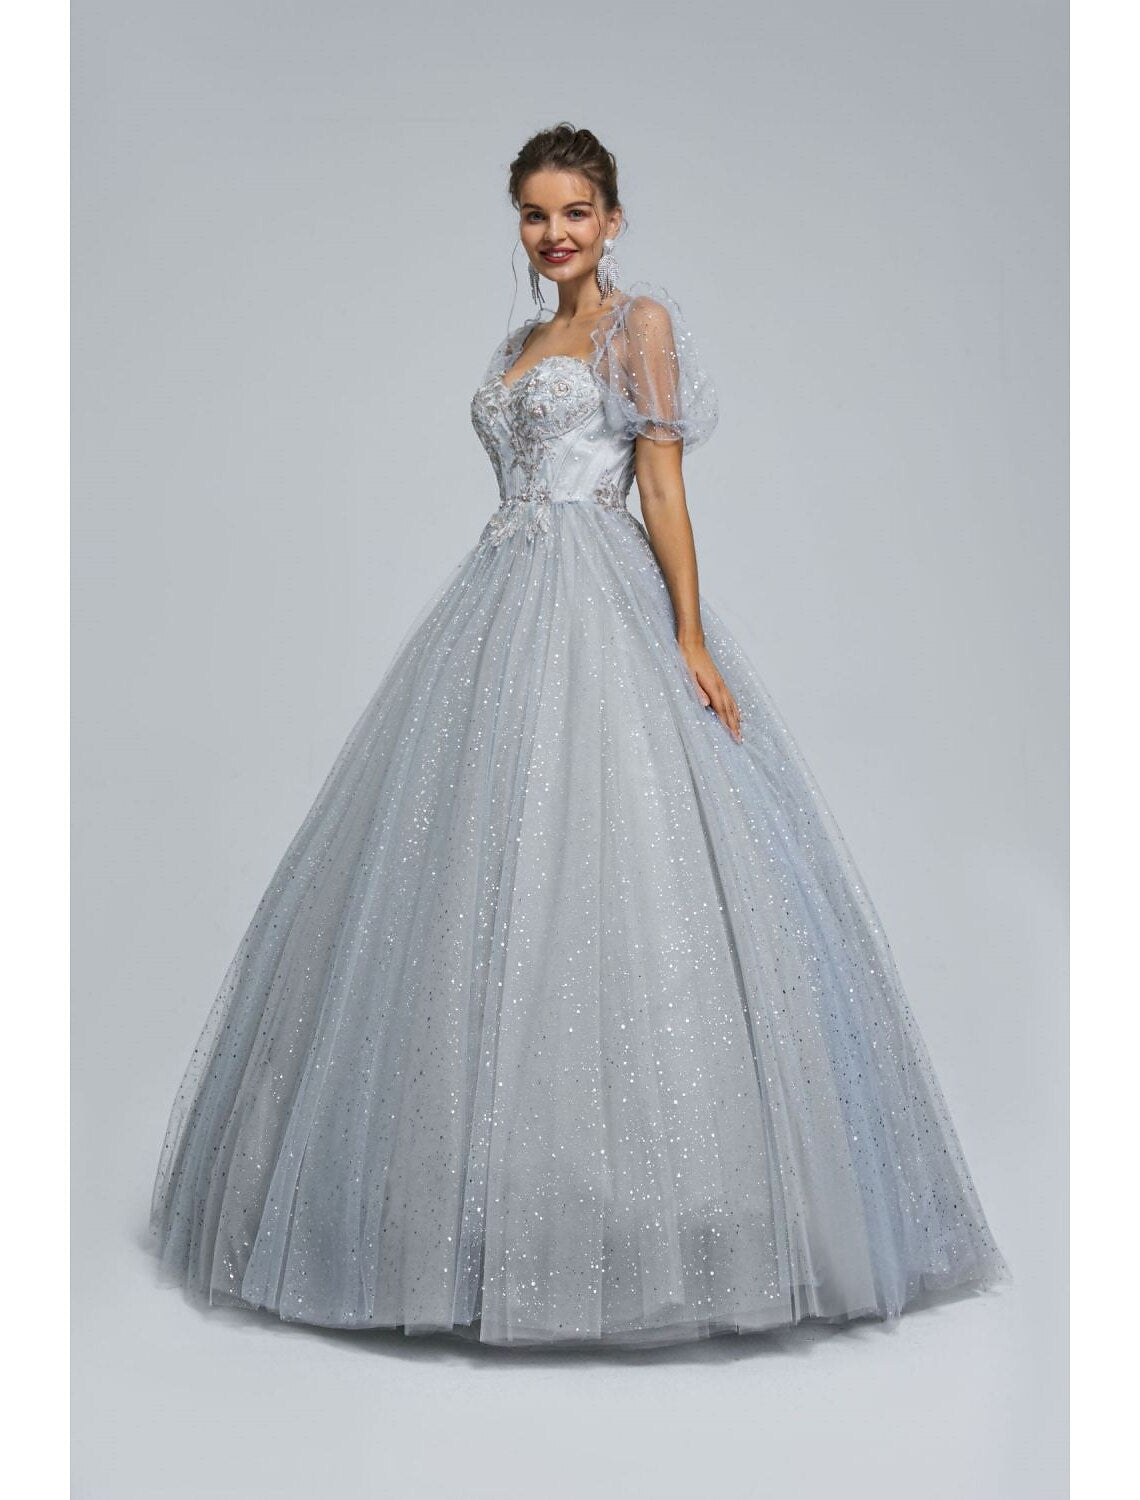 Ball Gown Prom Dresses Princess Dress Graduation Floor Length Short Sleeve Sweetheart Tulle with Sequin Appliques